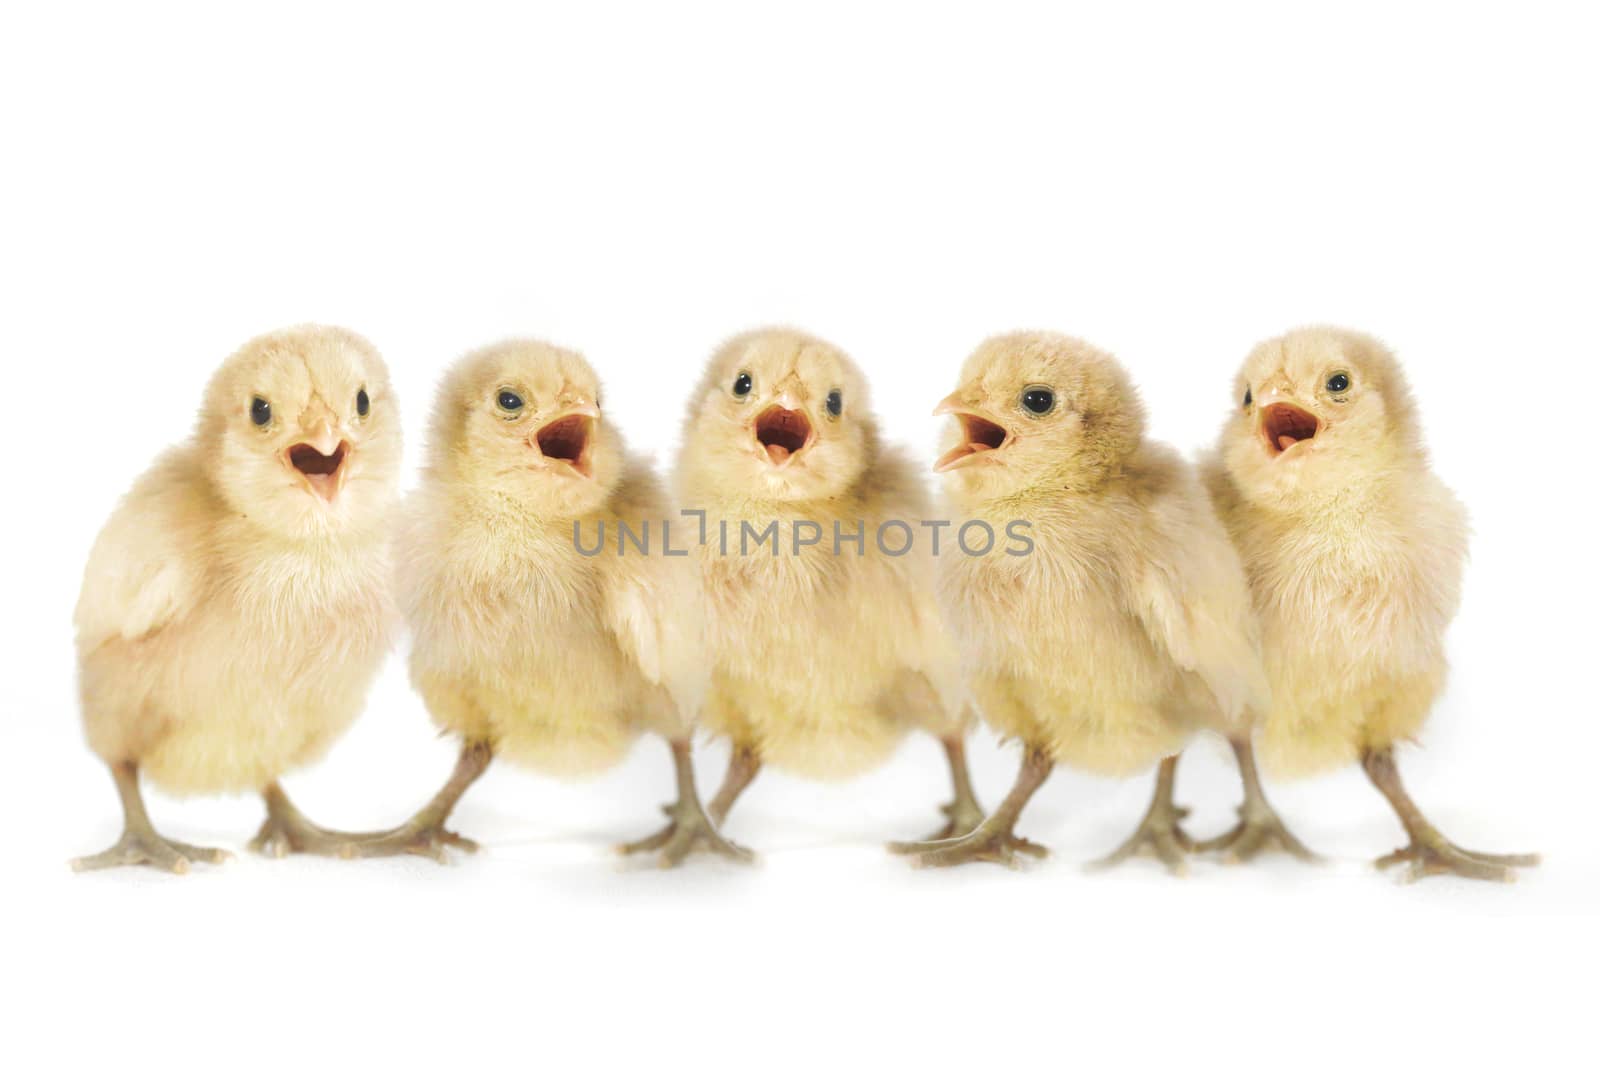 Cute Yellow Baby Chicks Lined Up Singing by tobkatrina